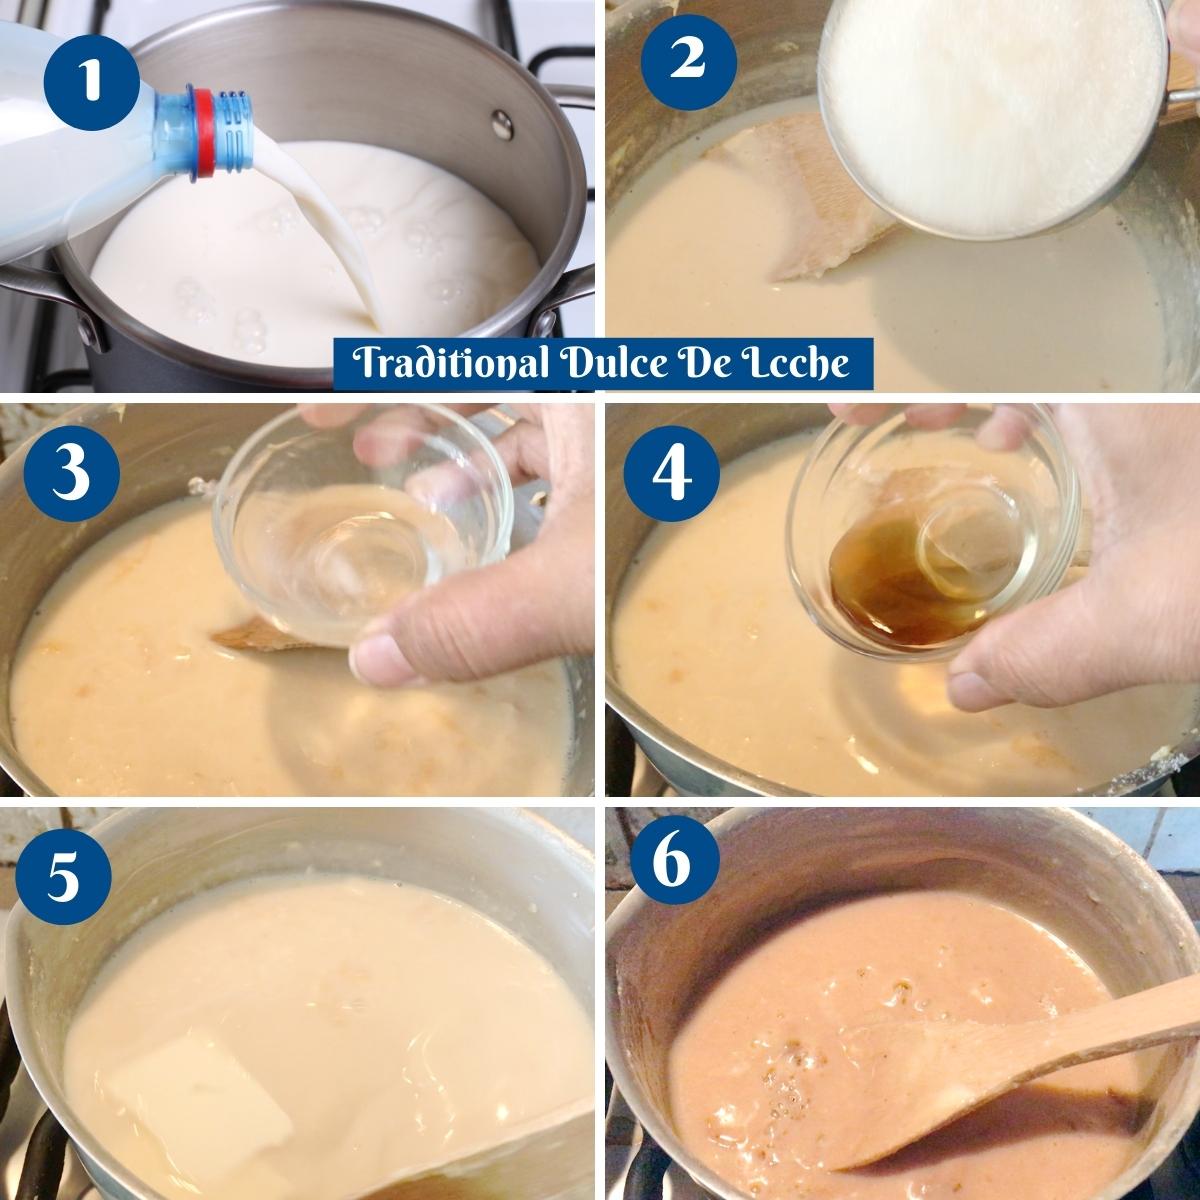 Progress pictures collage - how to make dulce de leche.